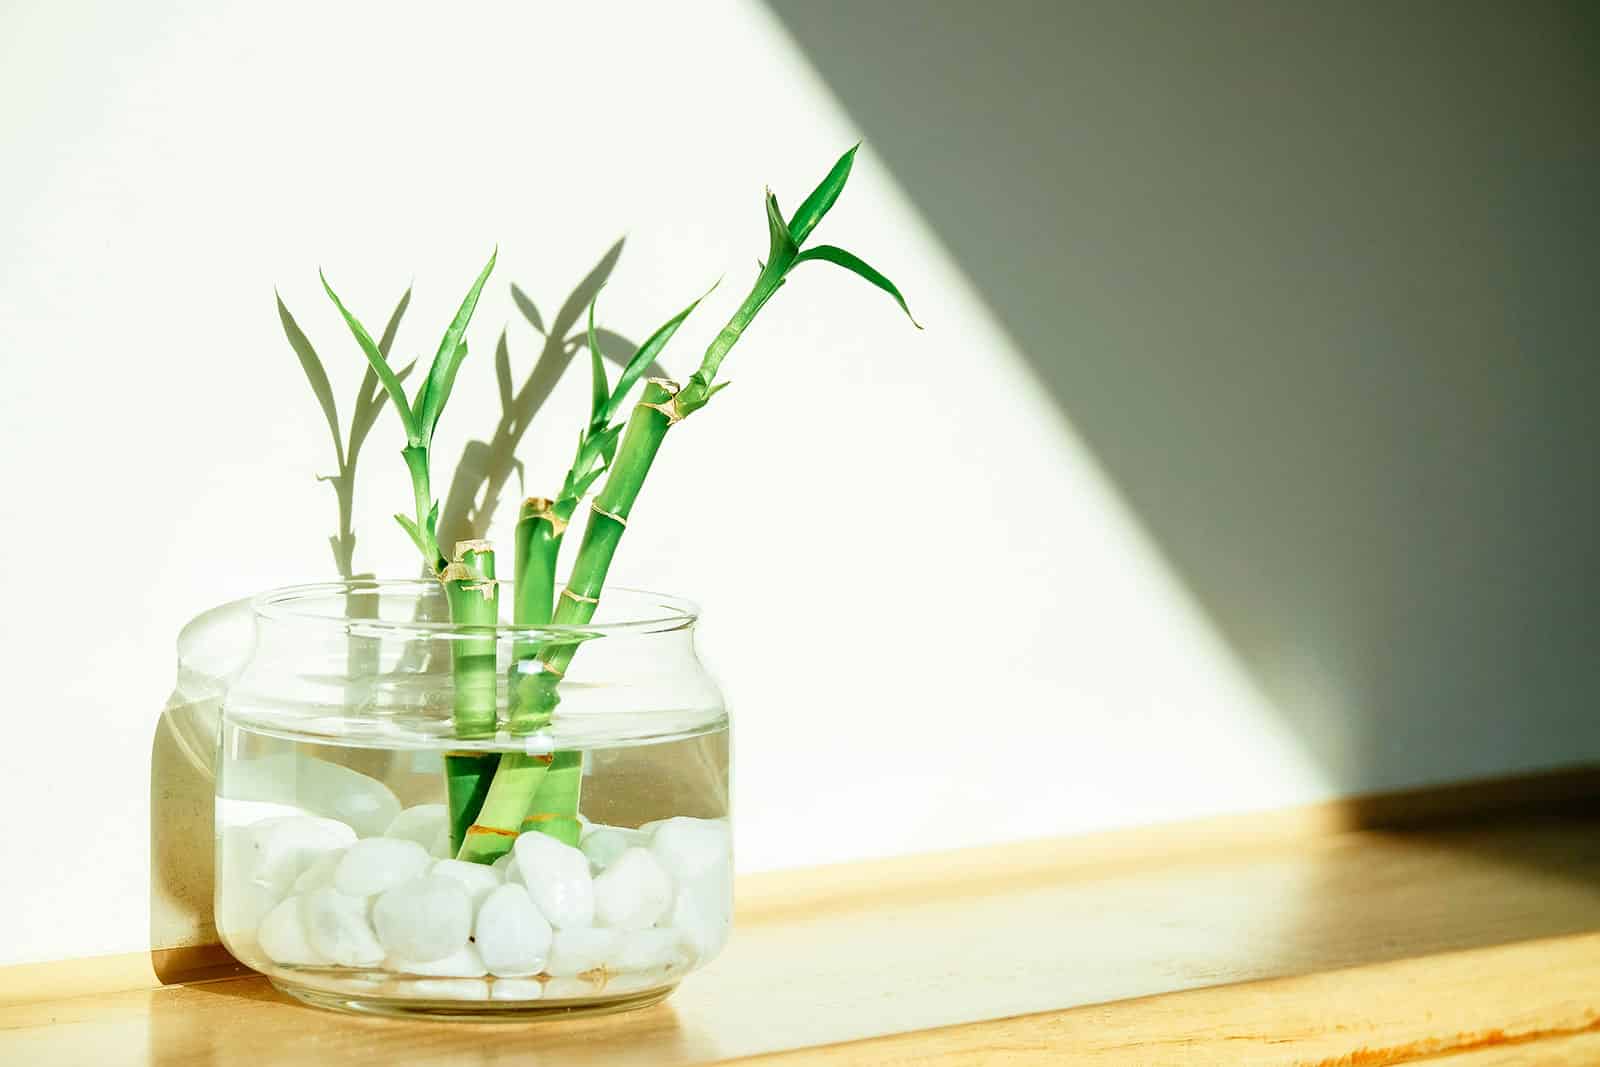 Lucky bamboo care: a no-fuss houseplant that grows in water